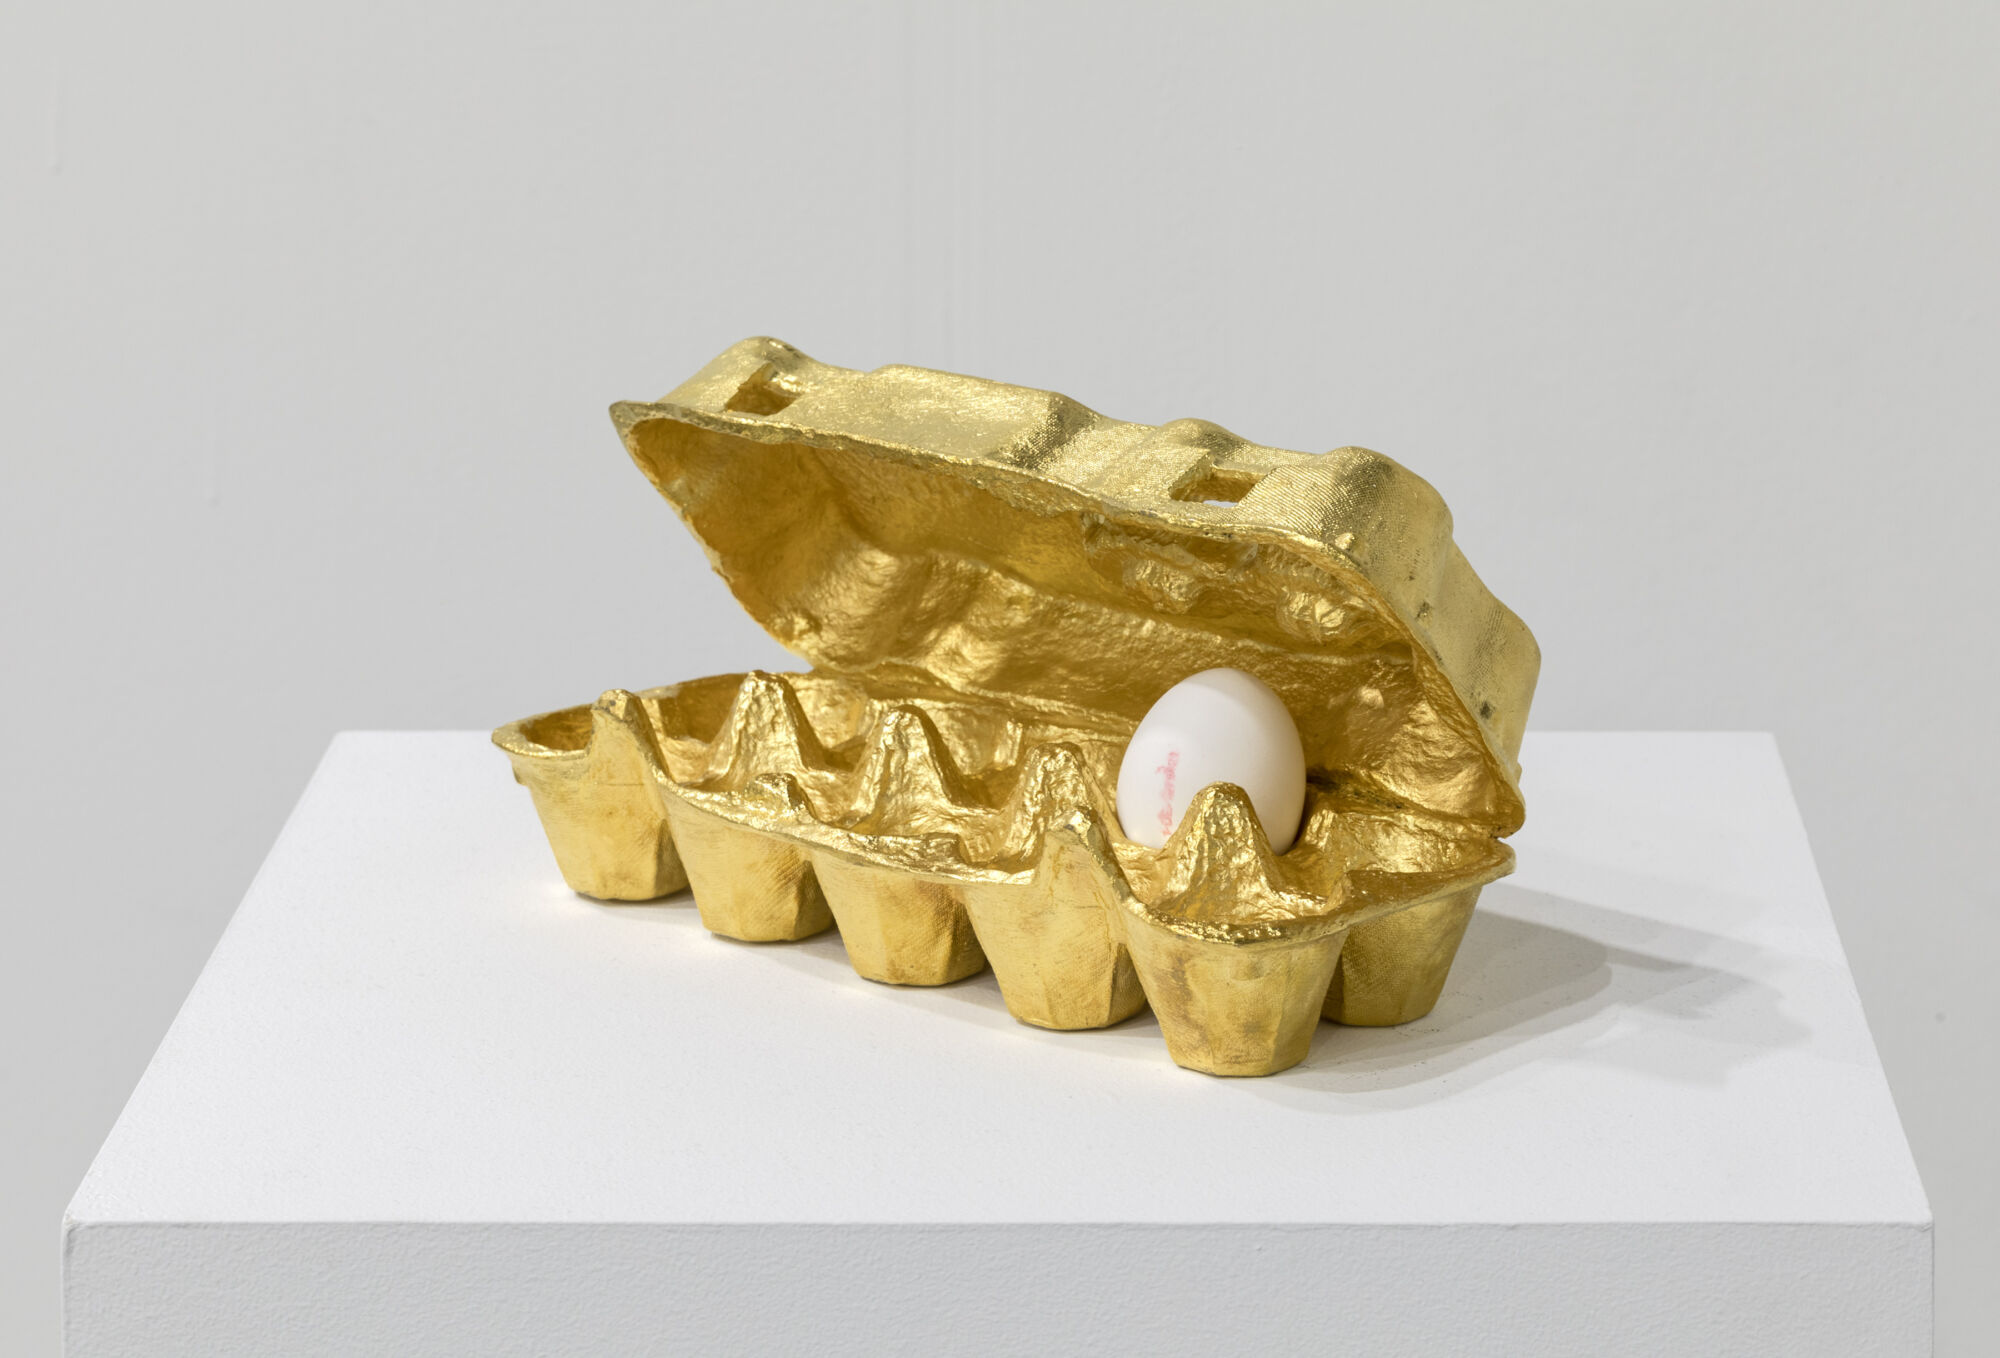 The Wick - He Xiangyu
Untitled
2021
Bronze, pure gold (99.99%), egg
24.4 x 12.1 x 12.5 cm
Courtesy of the artist and Andrews Kreps Gallery
